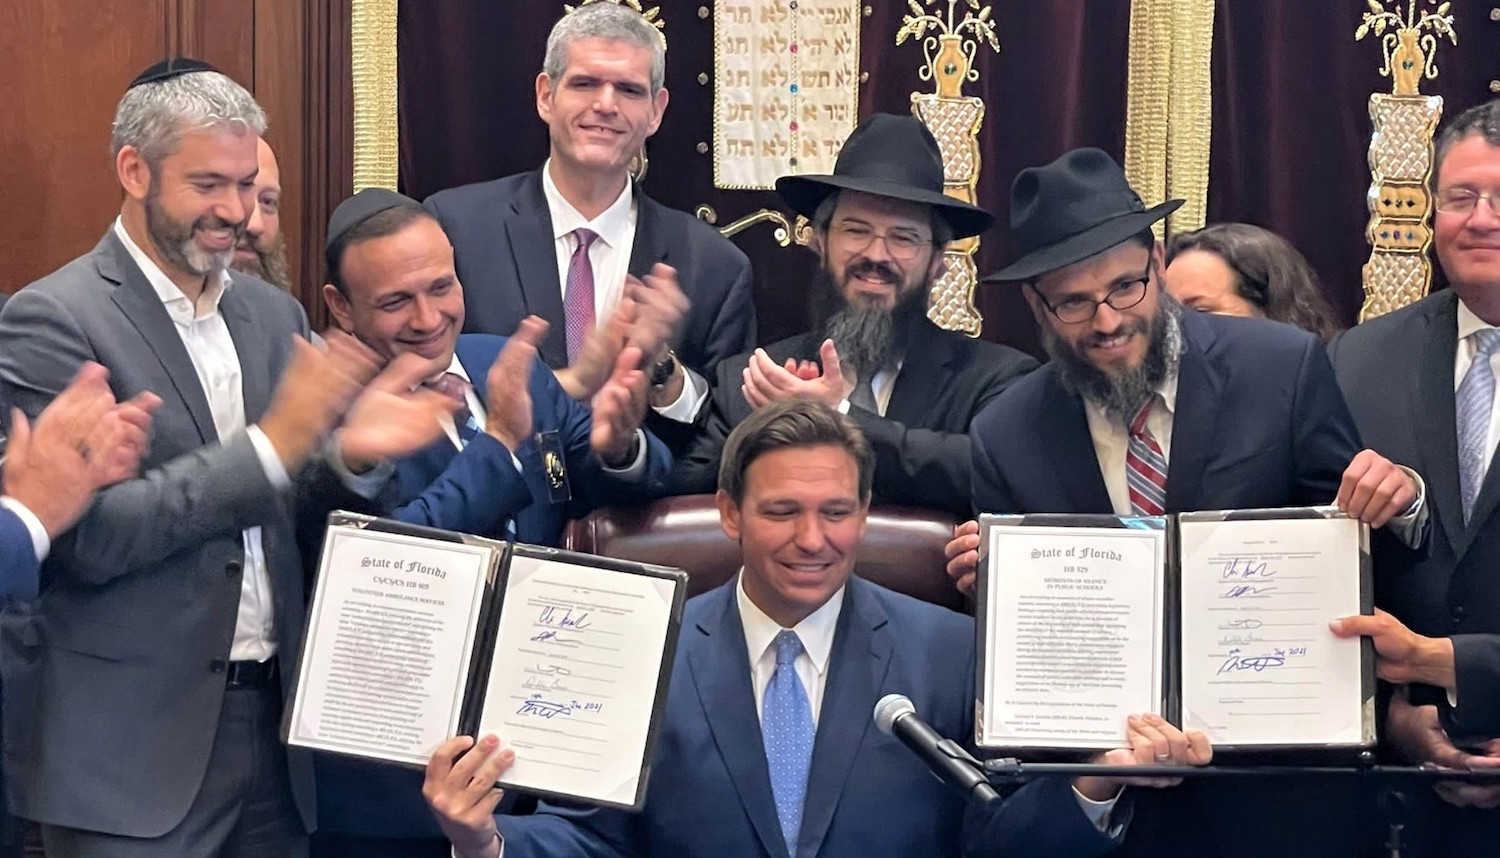 Judea and Samaria are not âoccupiedâ but âdisputed,â says DeSantis